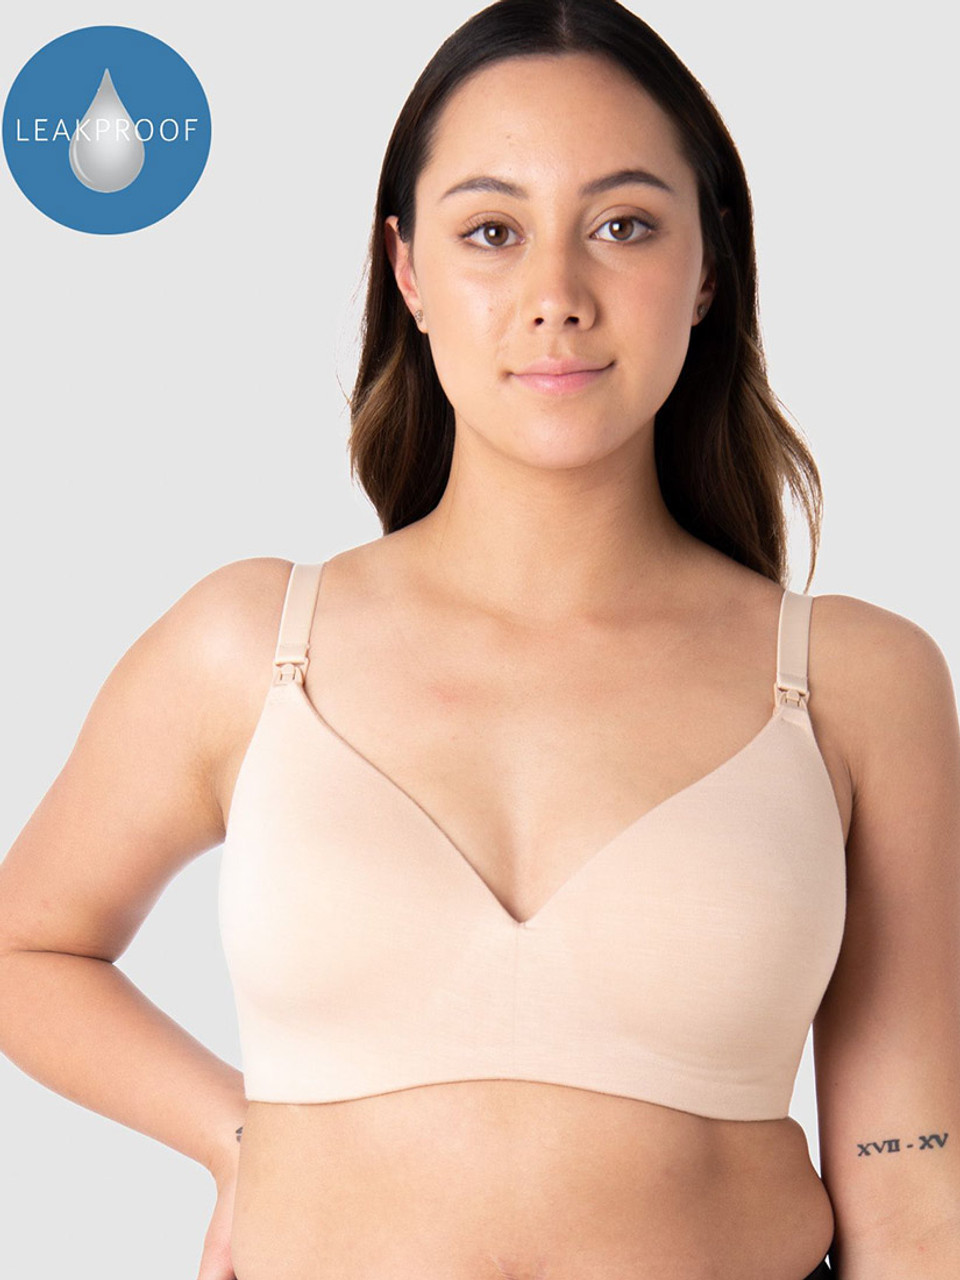 Find your right bra size the simple way - Hotmilk Lingerie